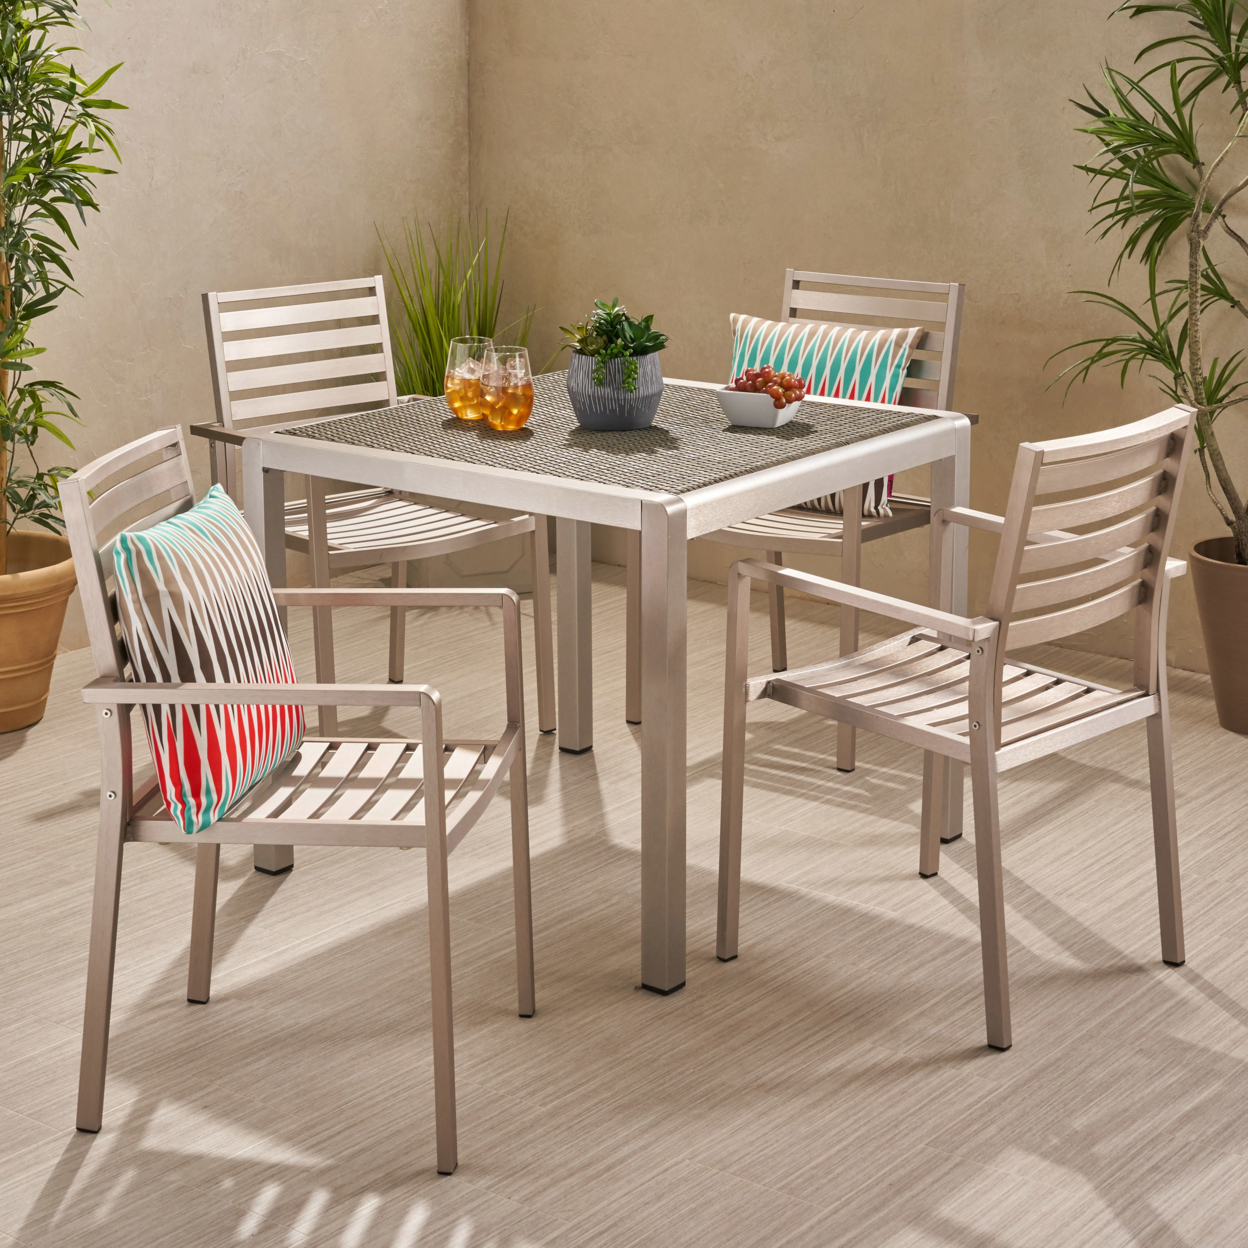 Christal Outdoor Modern 4 Seater Aluminum Dining Set With Faux Wood Table Top - Aluminum + Tempered Glass